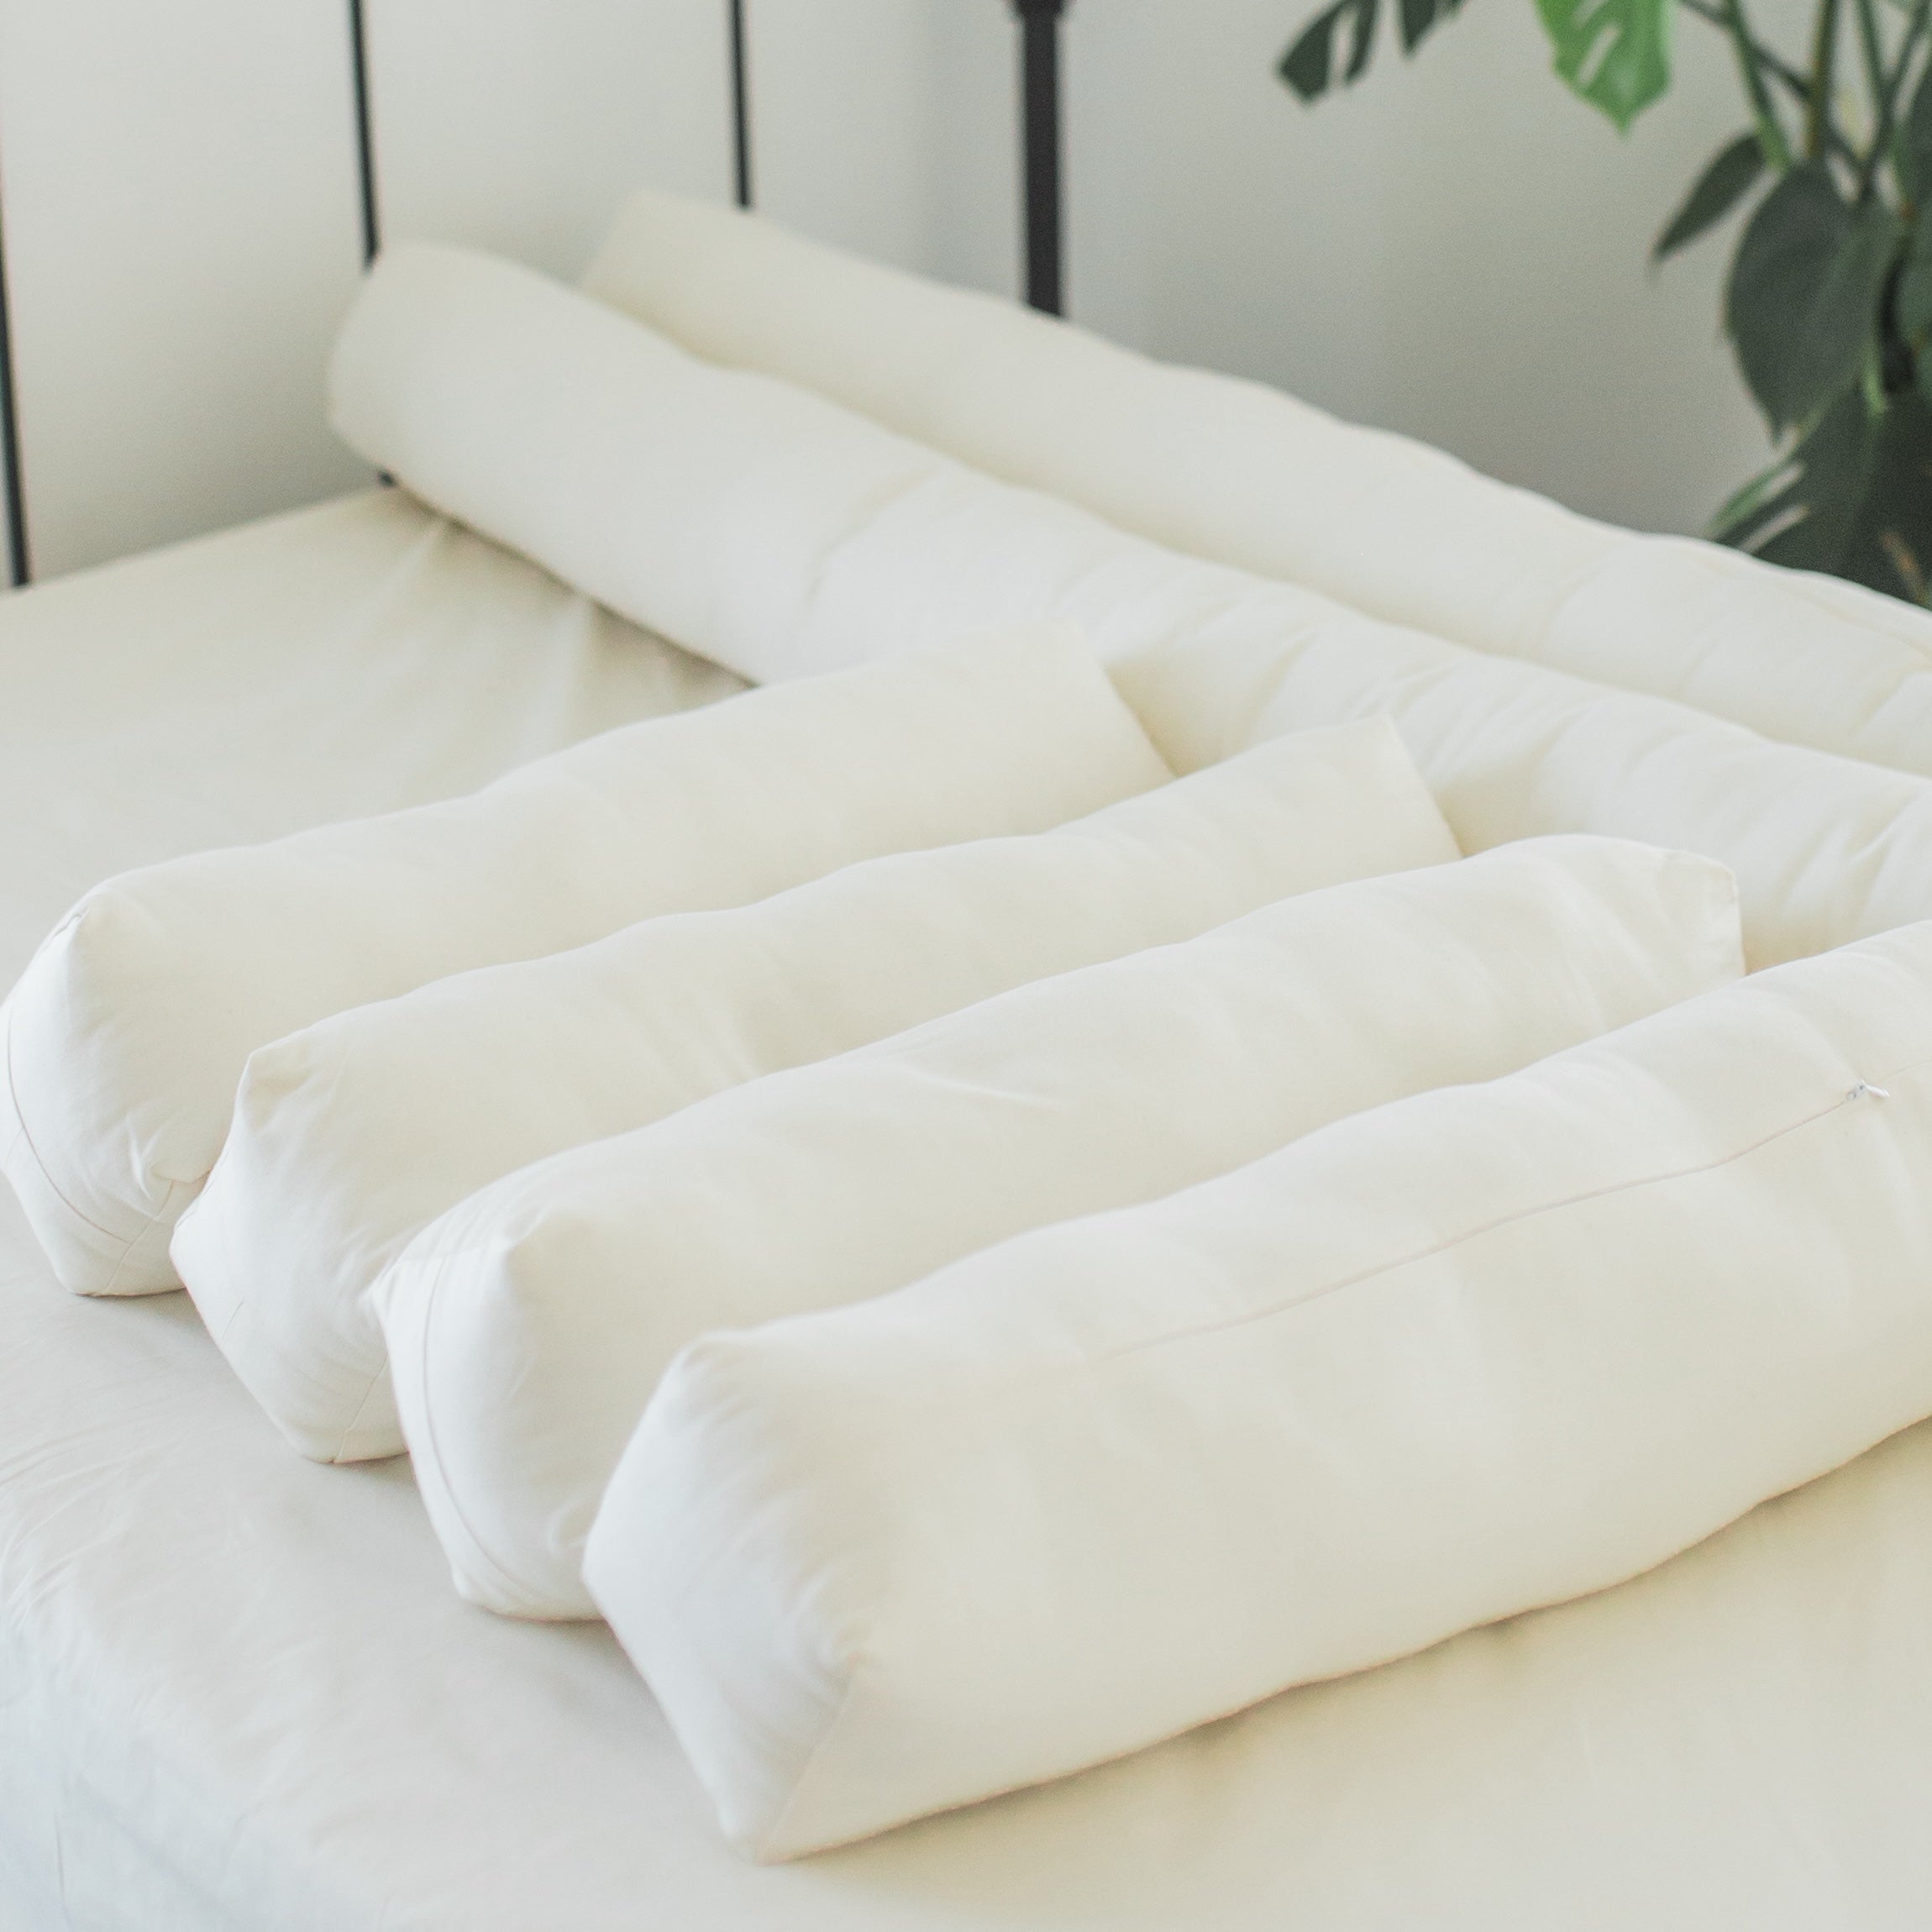 Oolie organic cotton bolster pillows in two different lengths, arranged on a bed.